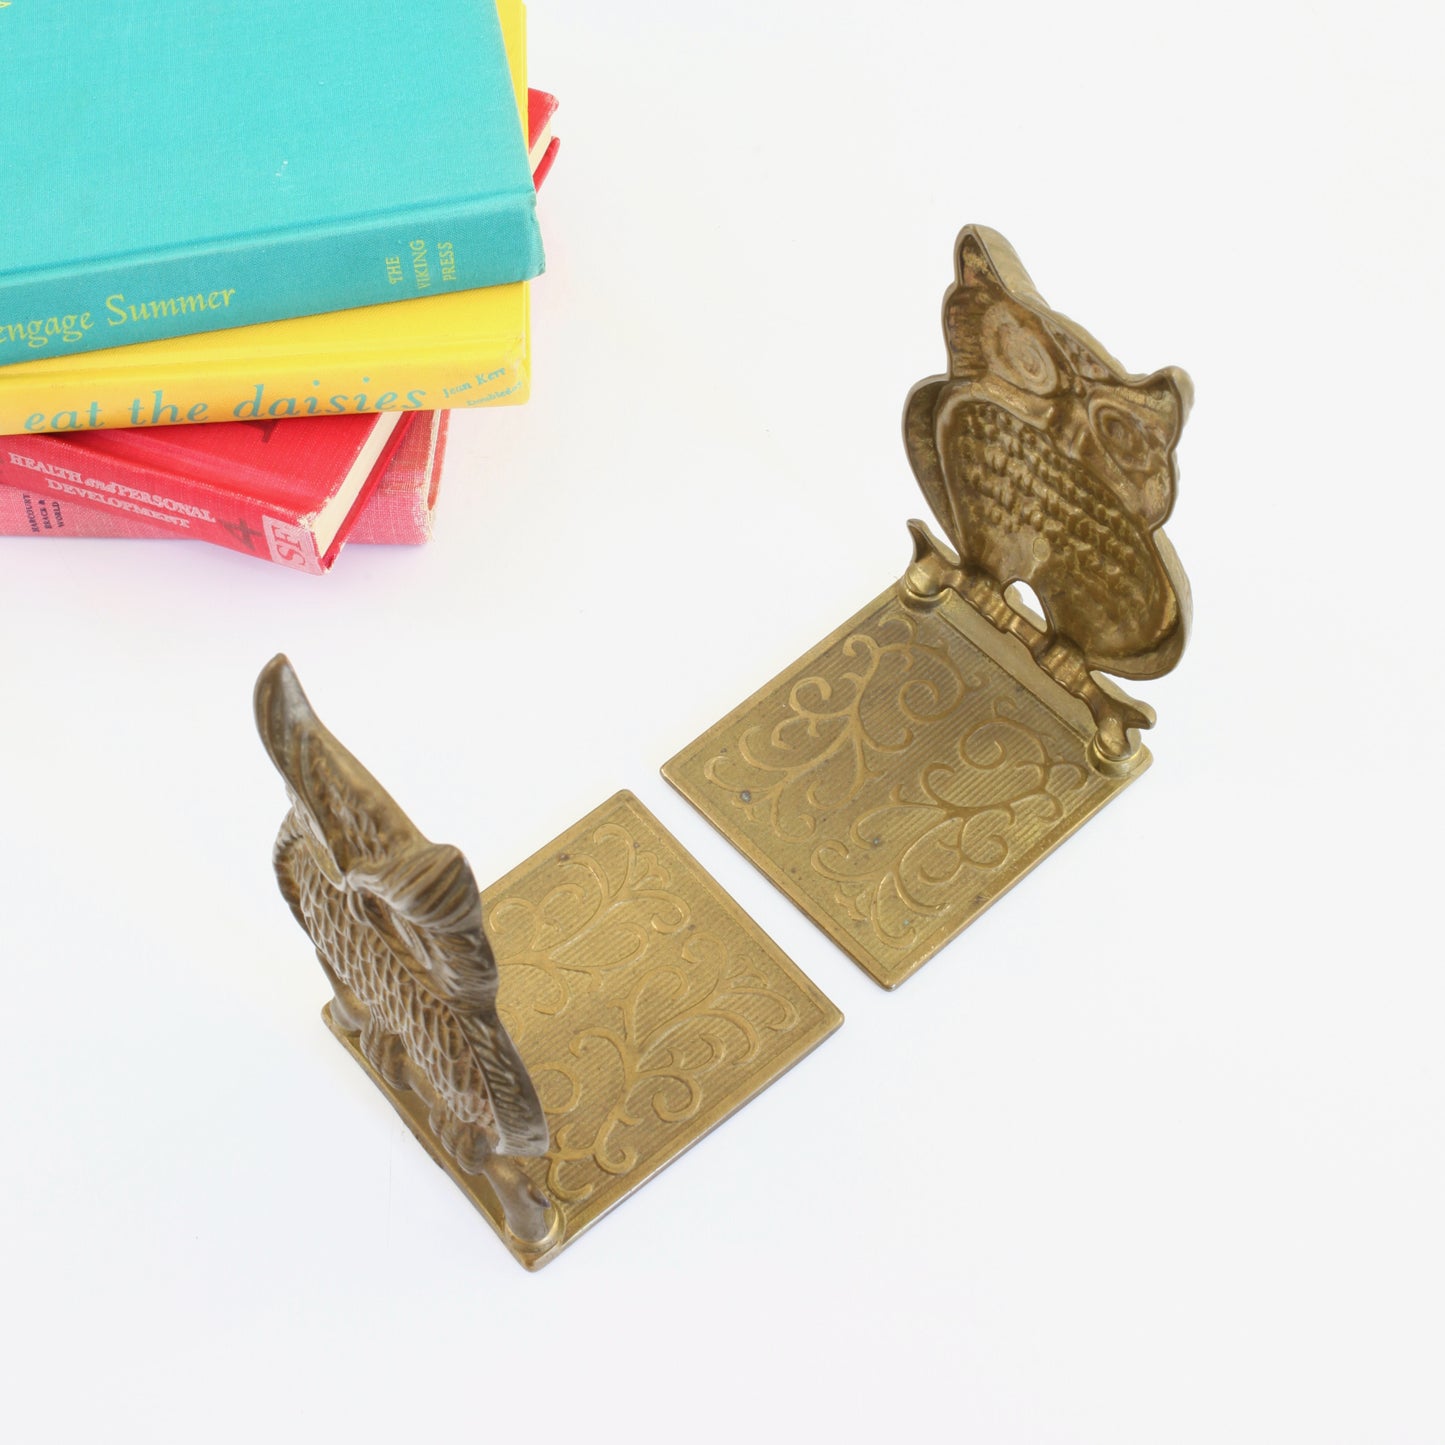 SOLD - Vintage Brass Owl Bookends